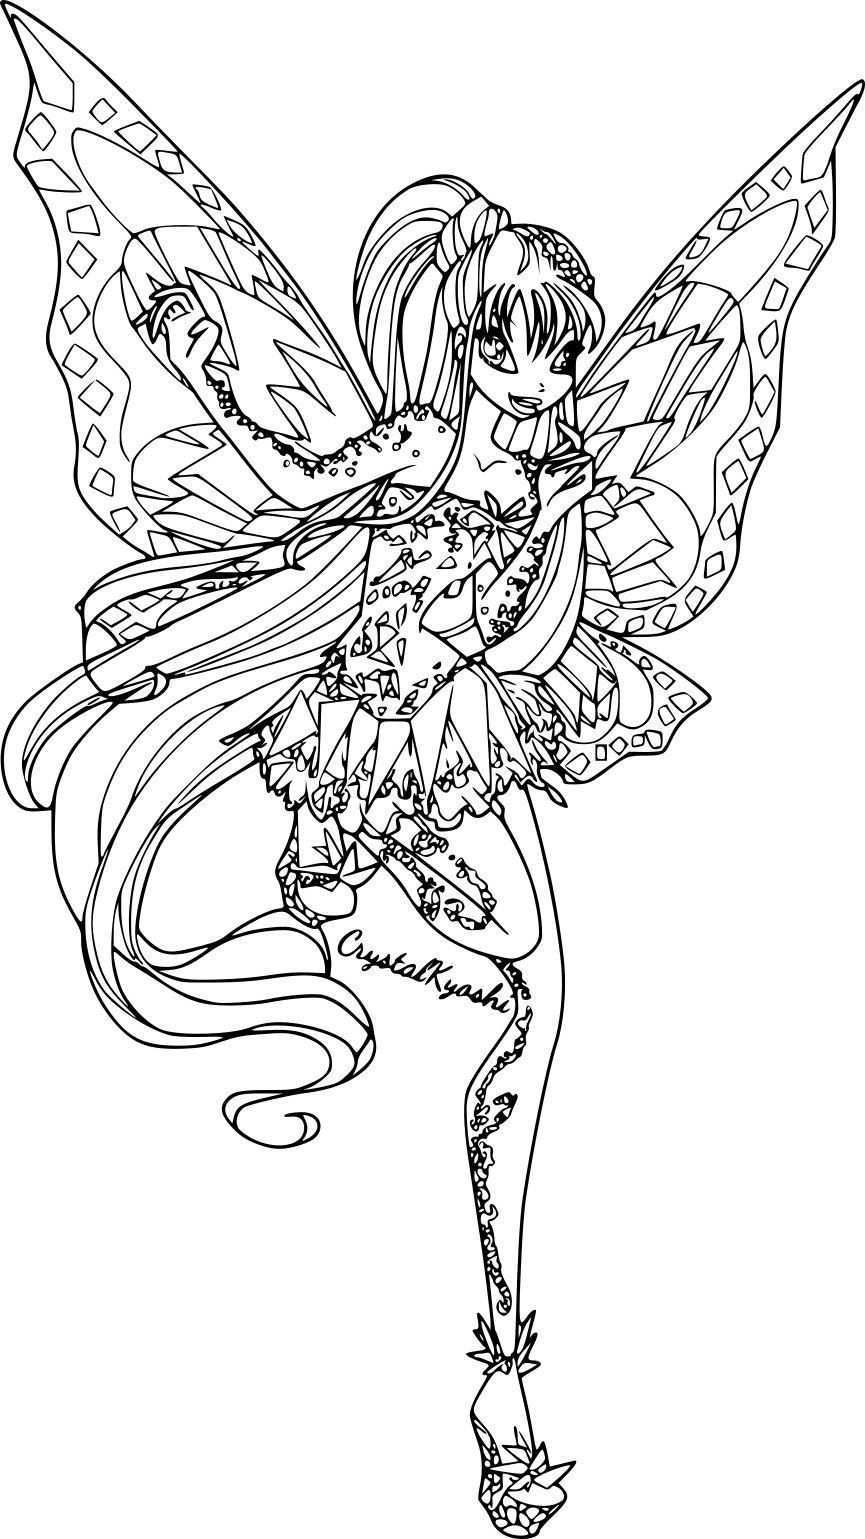 Winx Club Coloring Pages Unique Pin By Monica Johnson On Pencilmein Mermaid Coloring Pages Cute Coloring Pages Coloring Pages